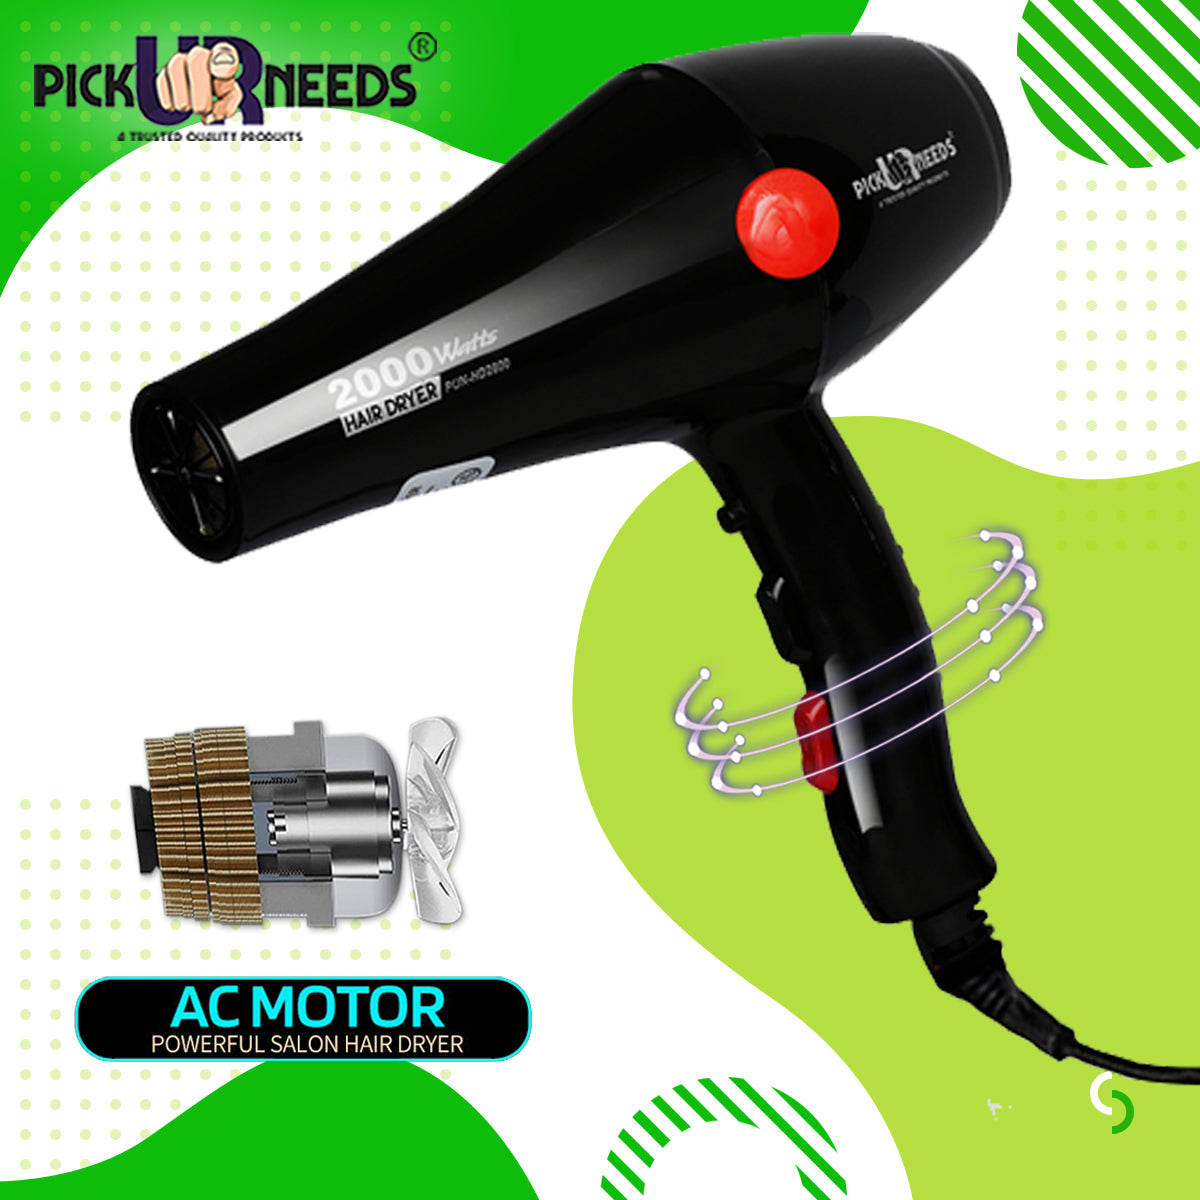 Pick Ur Needs Professional Stylish Salon Grade Hair Dryer With Comb Reducer For Men & Women